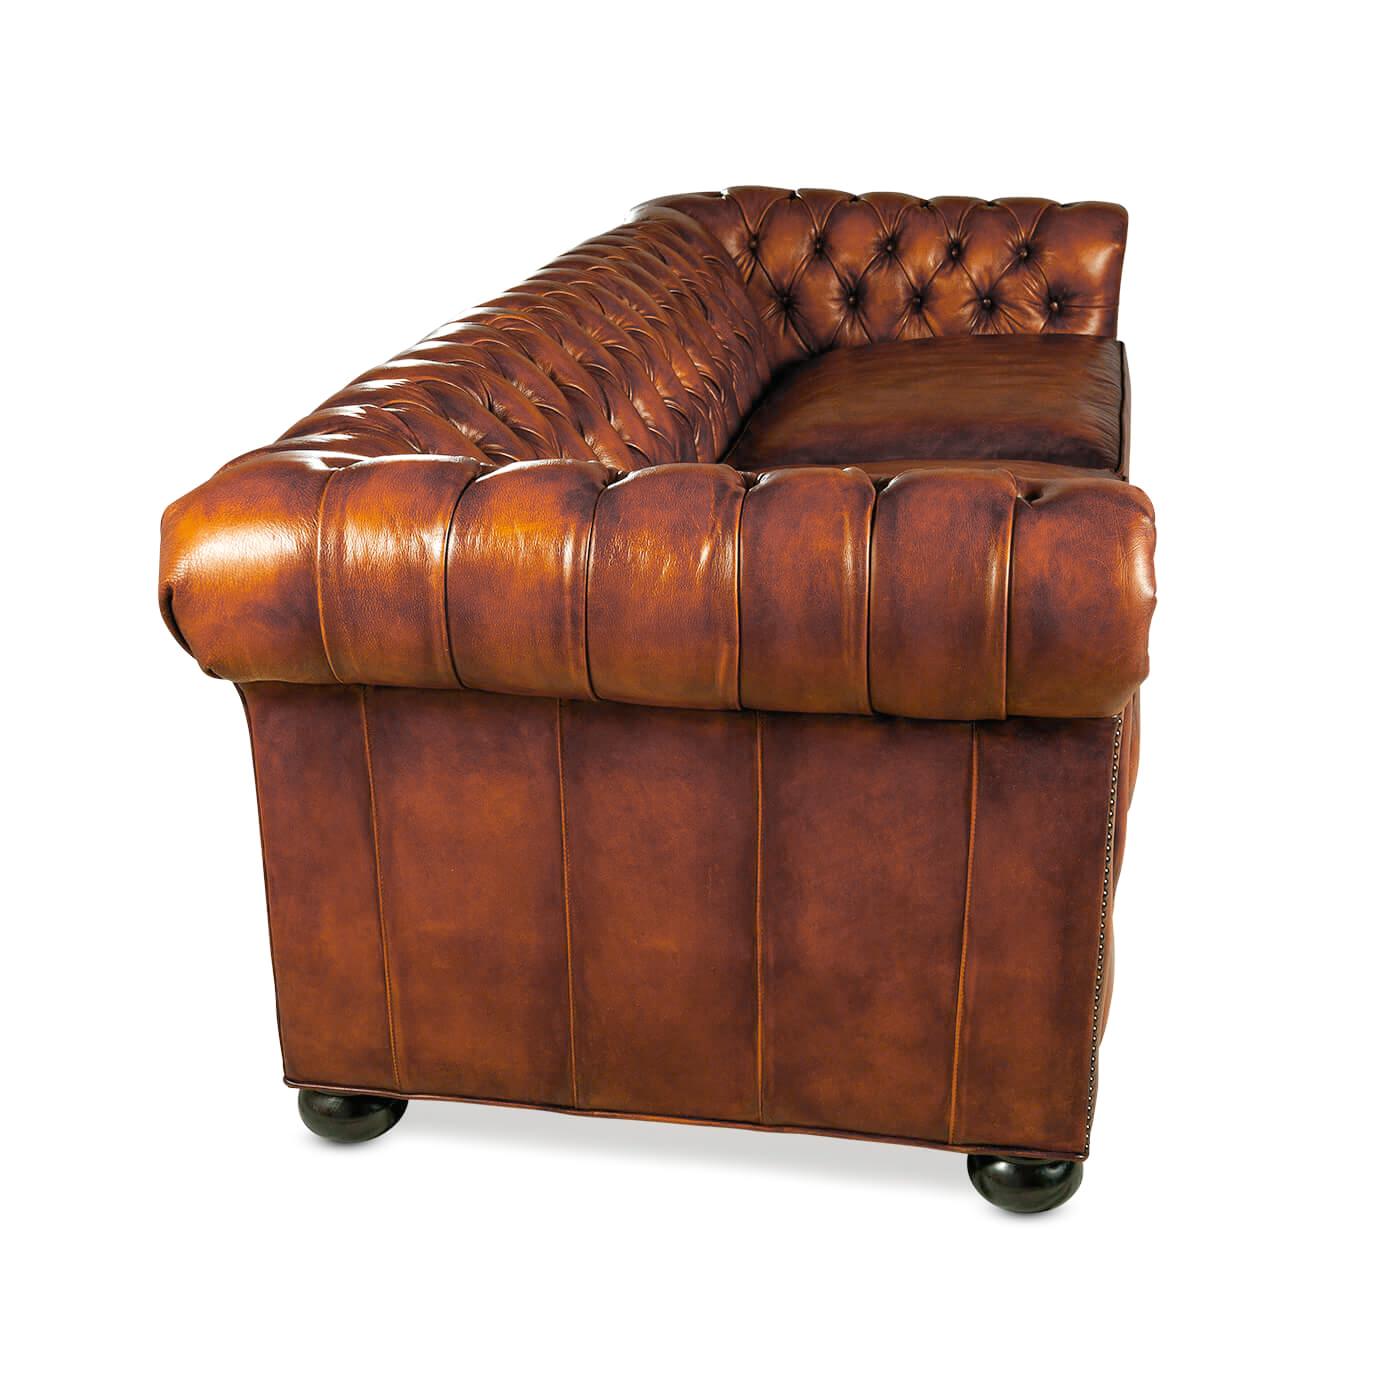 Contemporary Antiqued Chesterfield Leather Sofa For Sale